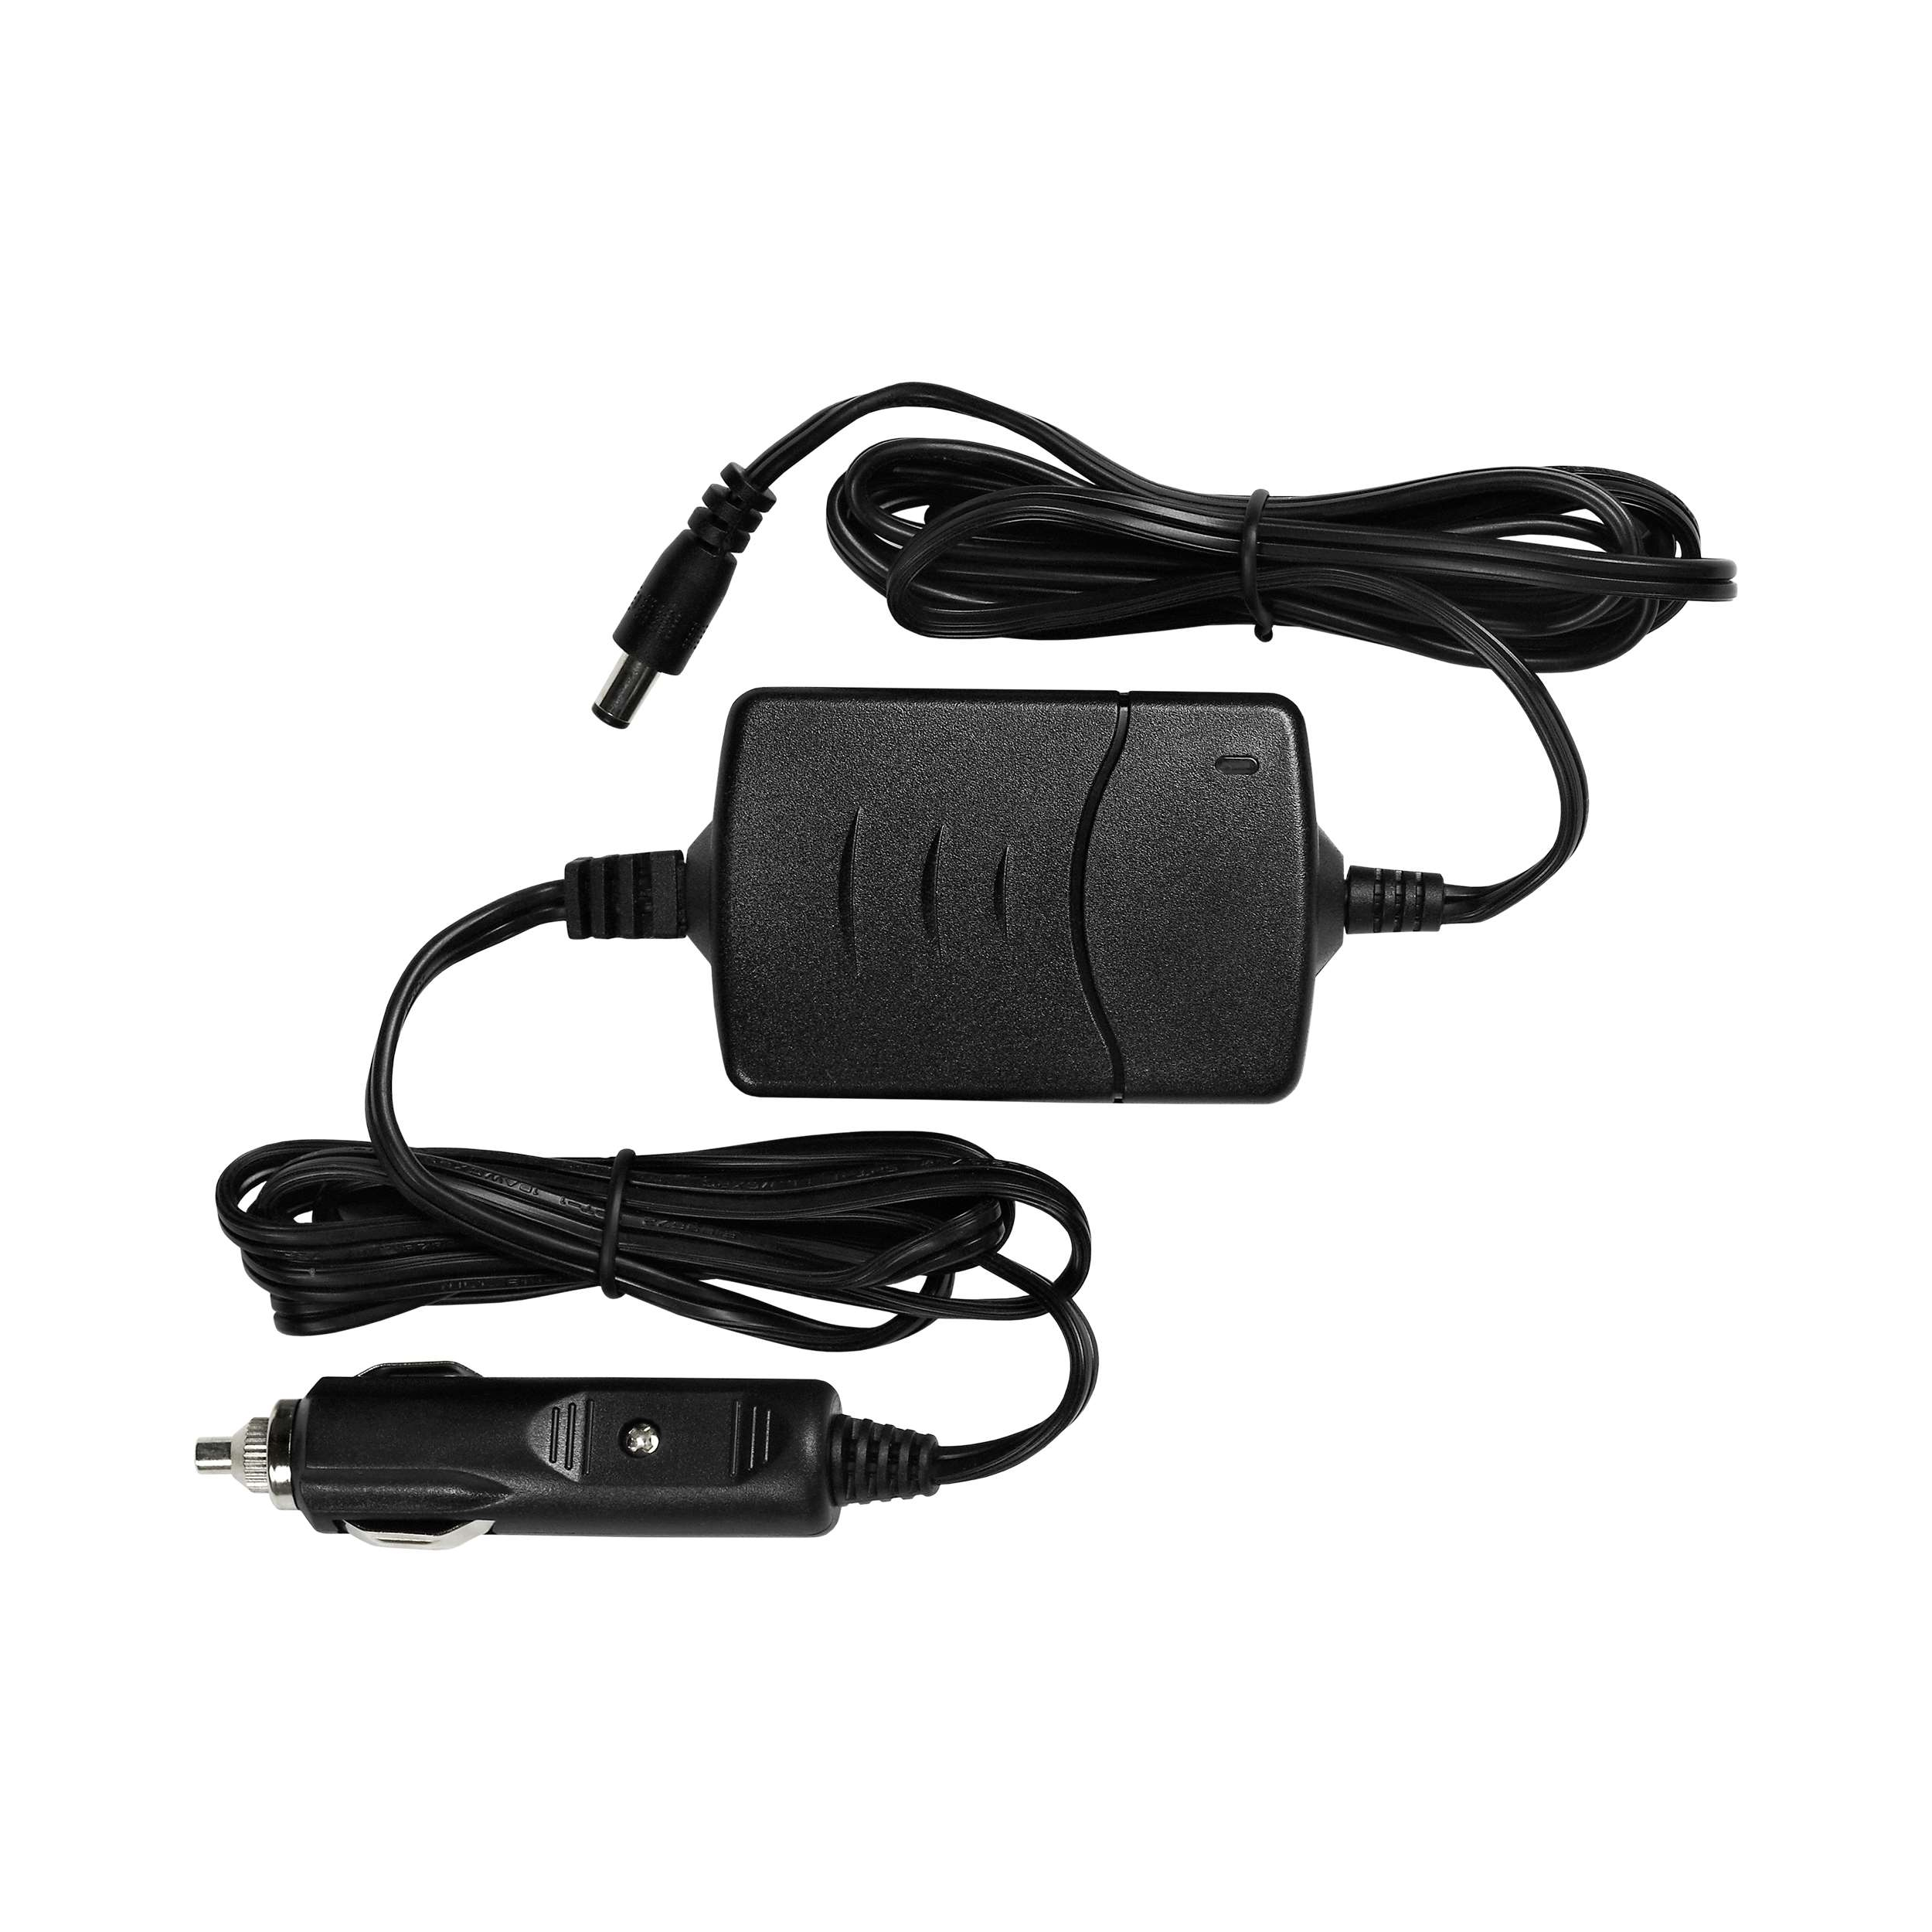 Profoto Car Charger 1.8a For B1/B1x/B2 Battery